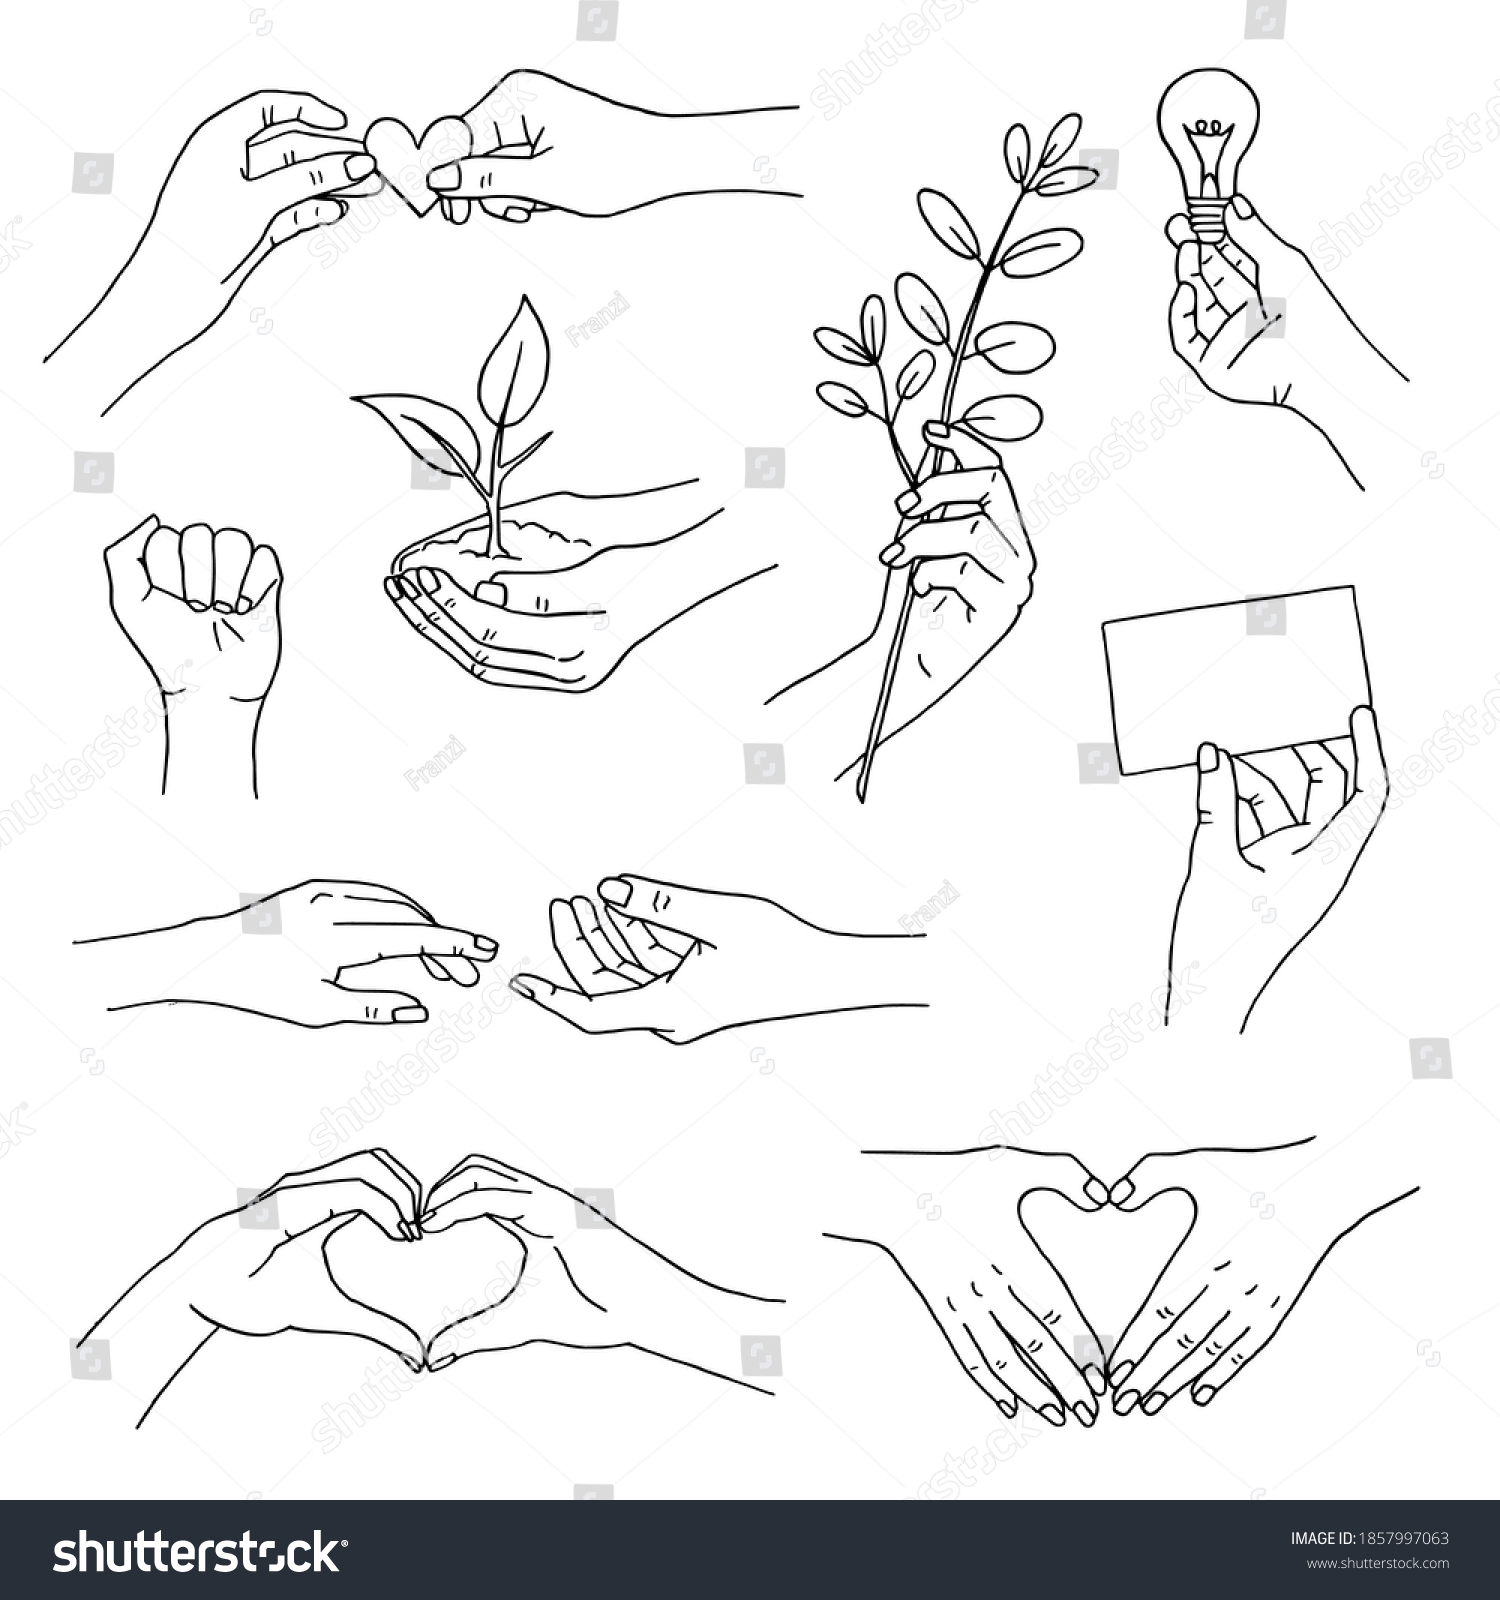 Outline Drawings Hands Moving Holding Different Stock Vector (Royalty ...